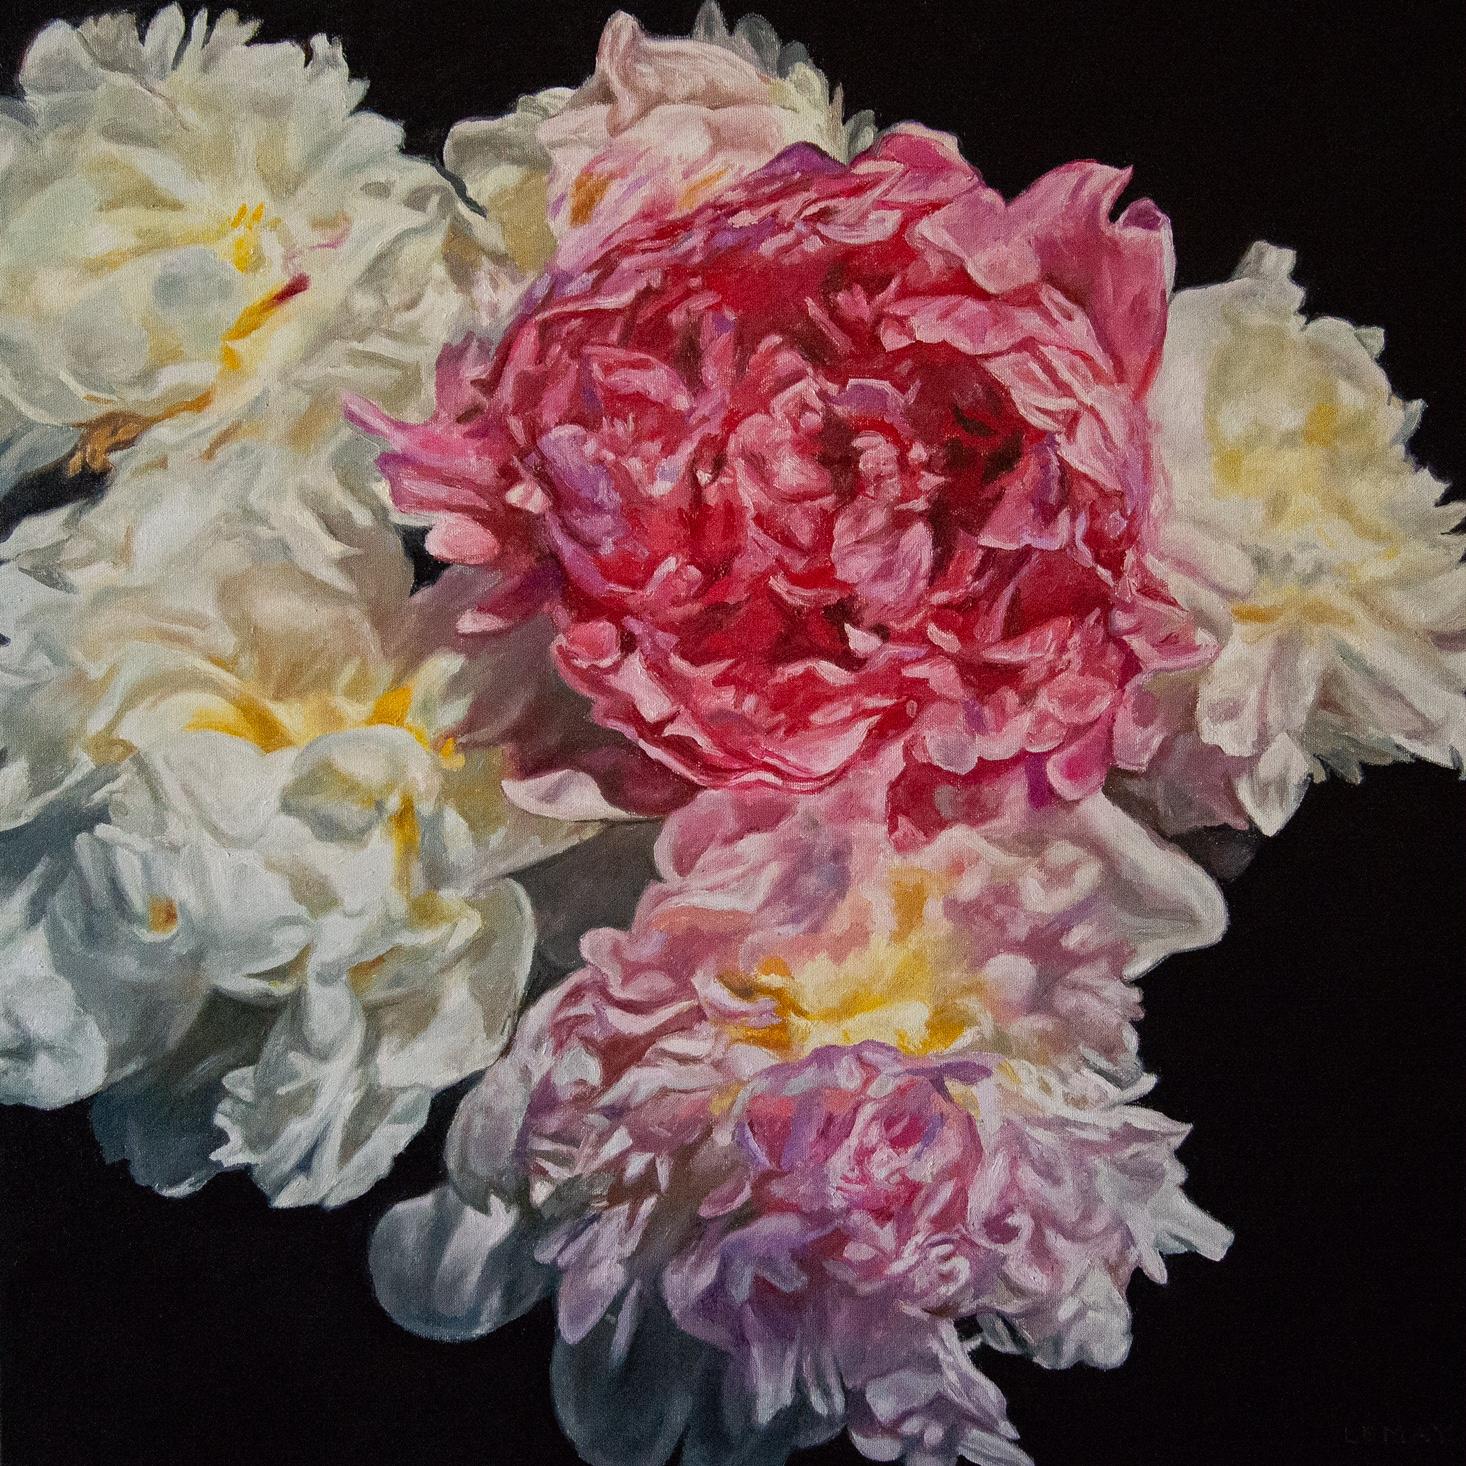 Pink and White Peonies-original modern realism floral painting-contemporary Art